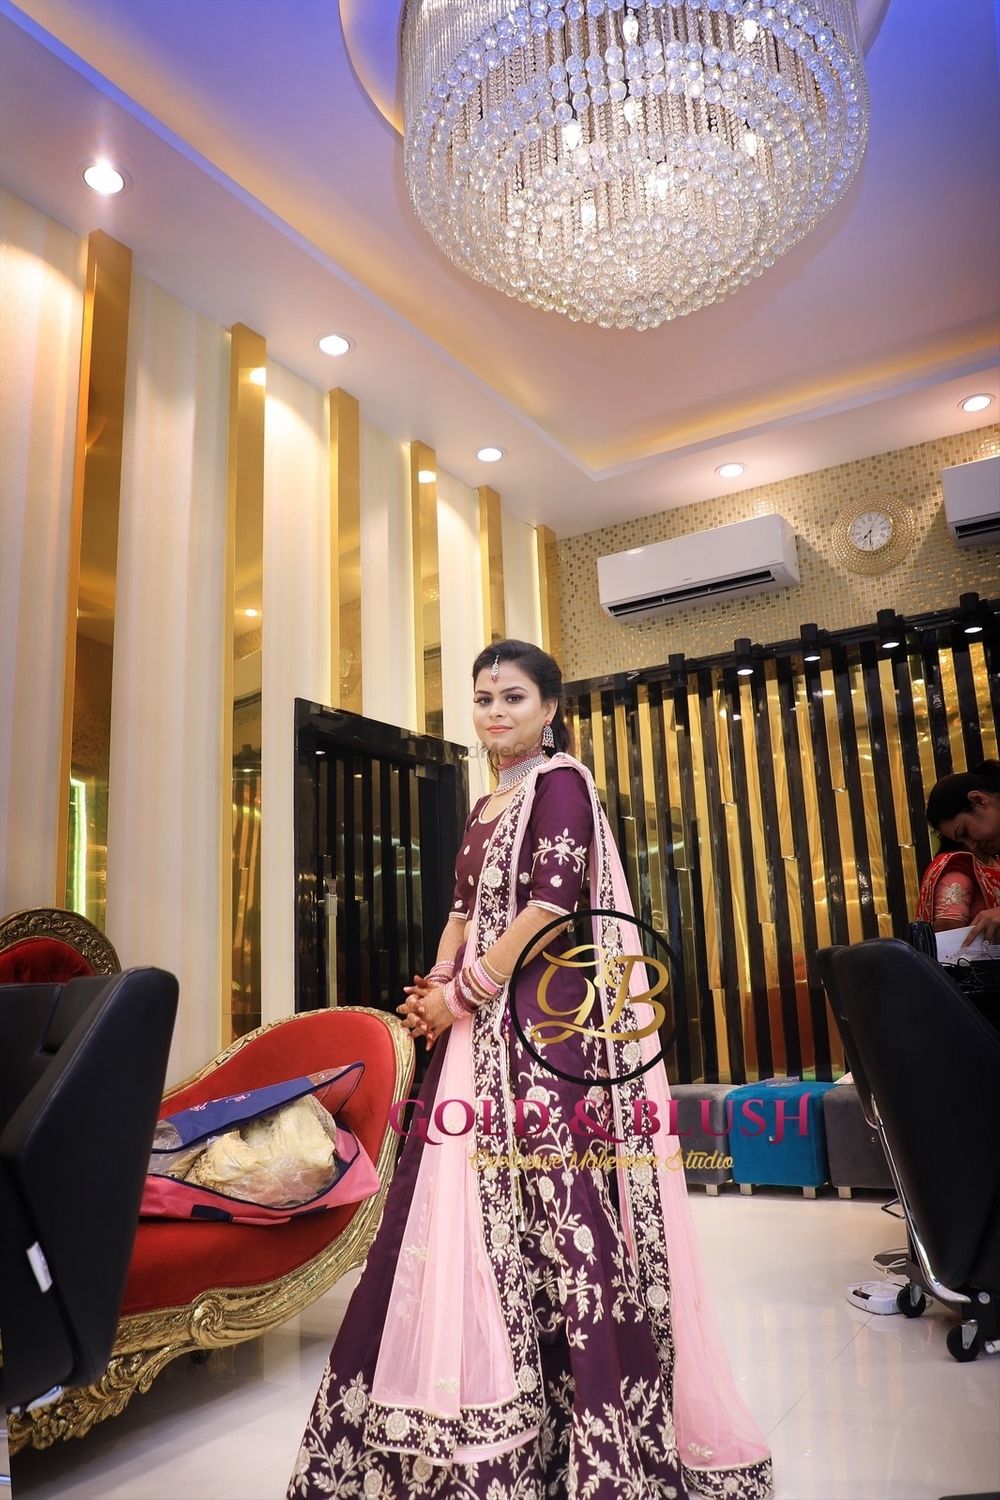 Photo From Prachi fr her sangeet - By Gold & Blush Makeover Studio 